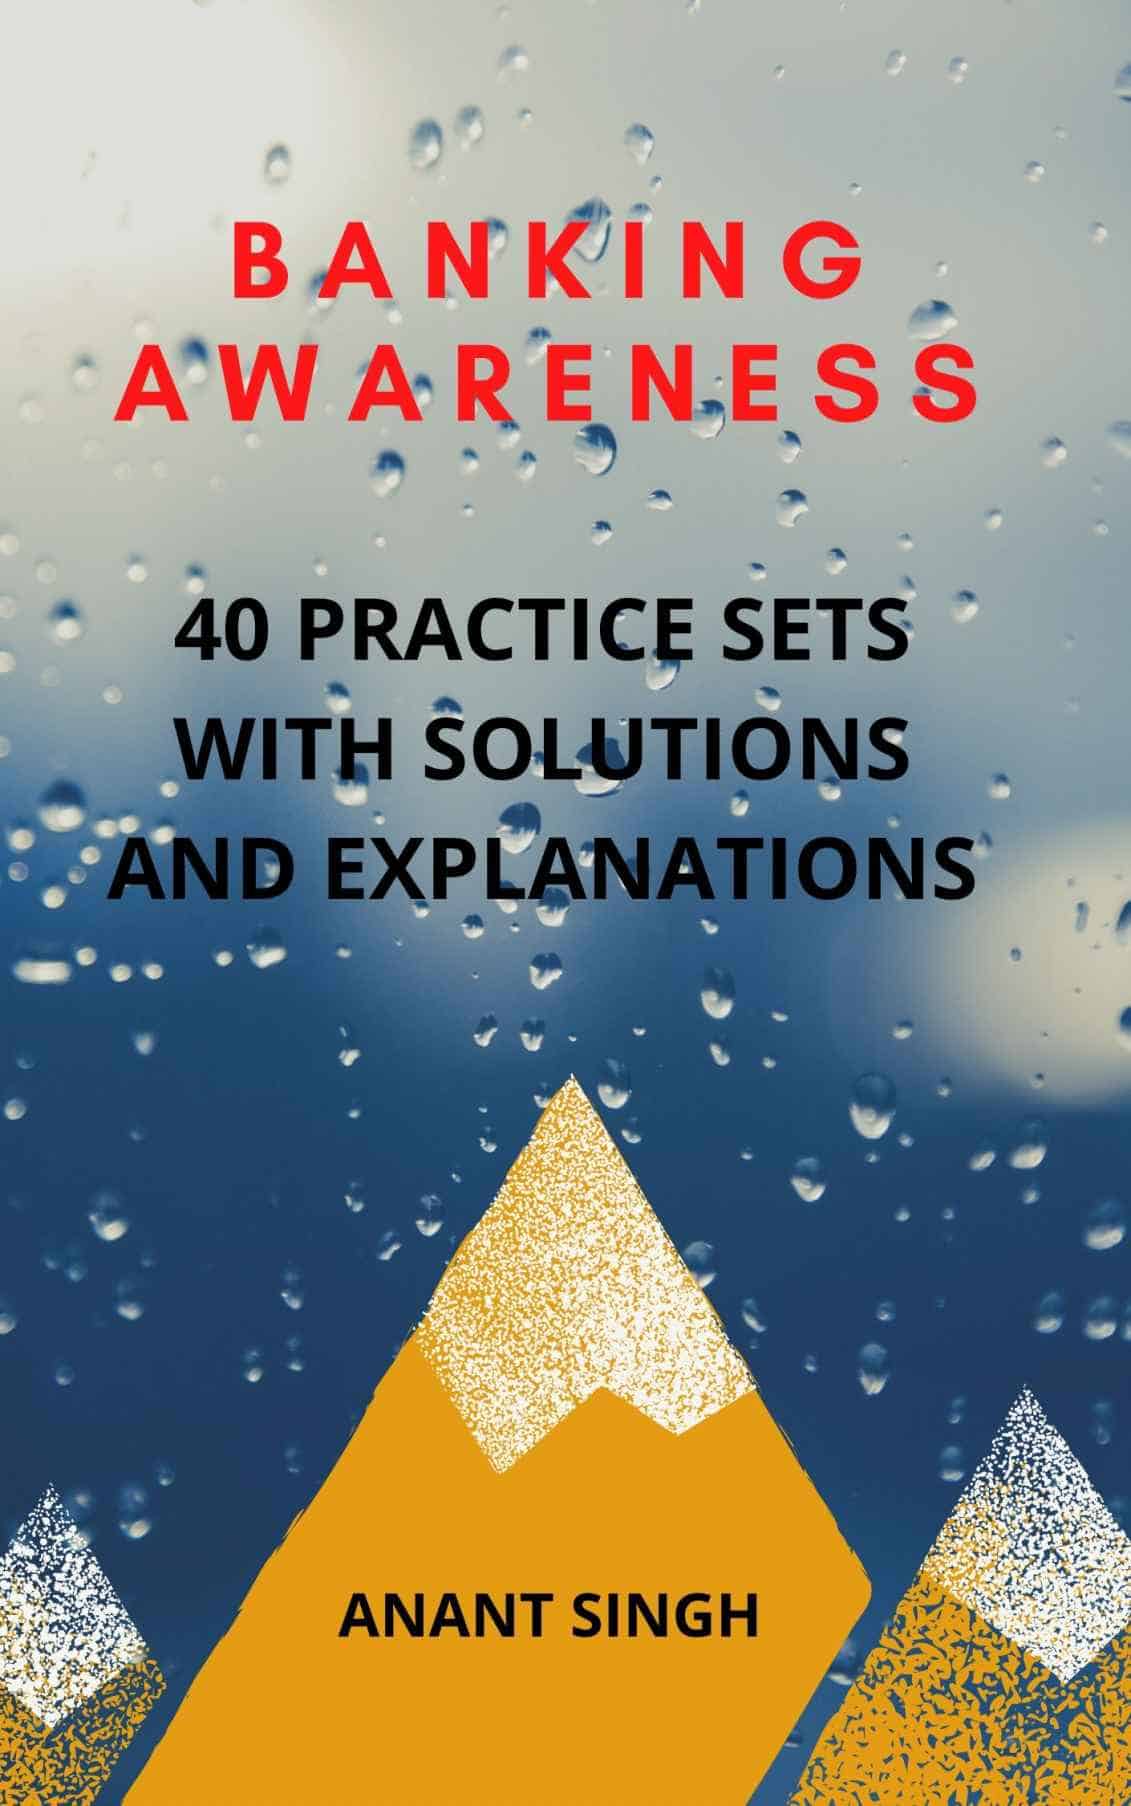 Banking Awareness 40 Practice Sets With Solutions & Explanations - Anant Singh